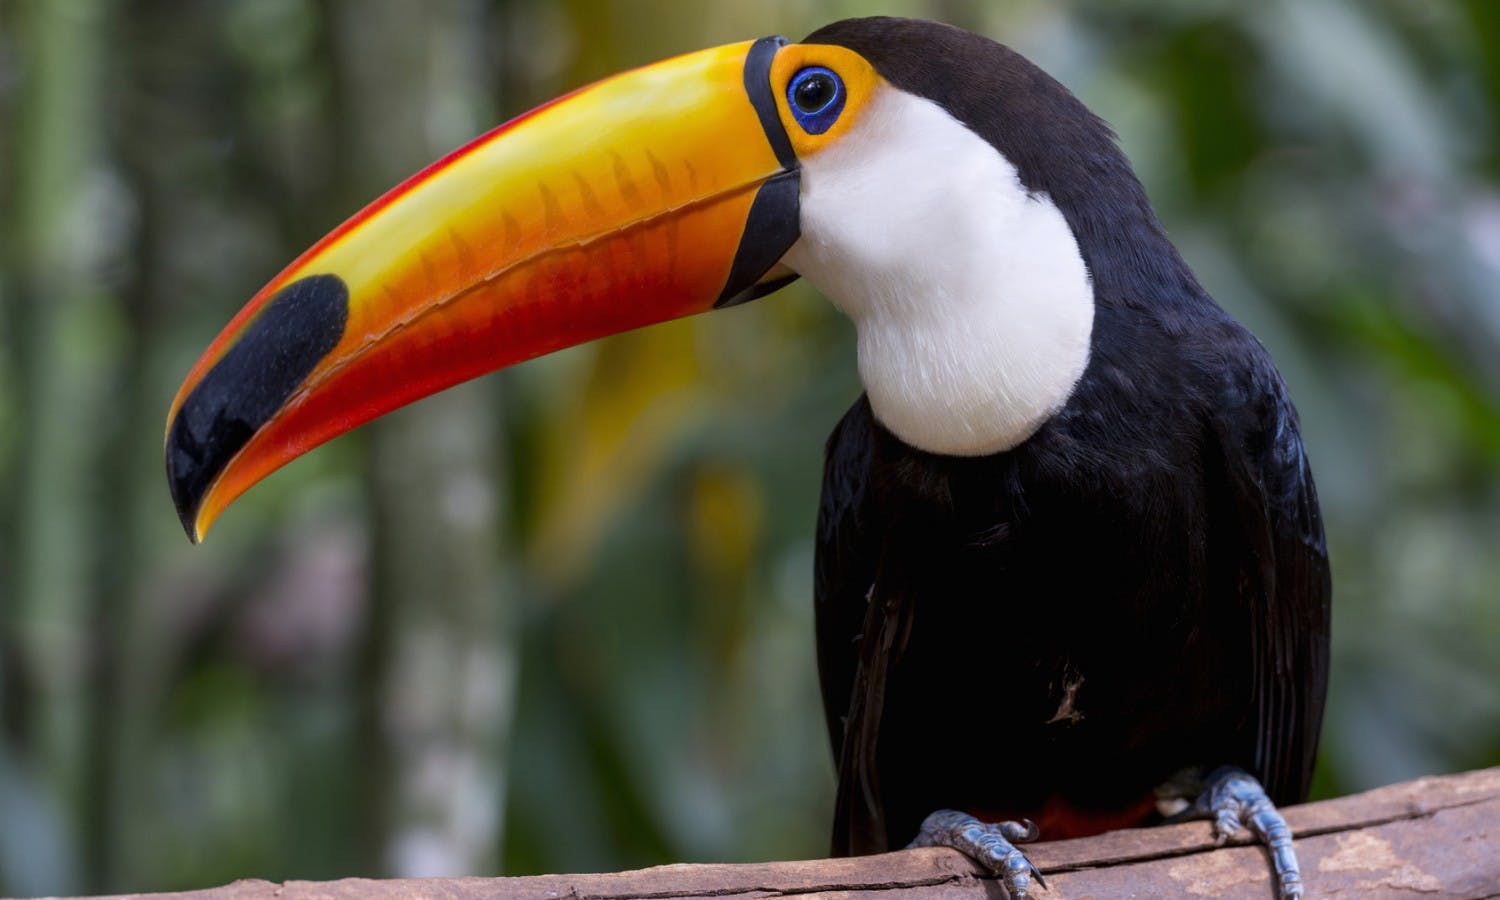 Toucan (Ramphastos Toco) sitting on tree branch in tropical forest or jungle.jpg